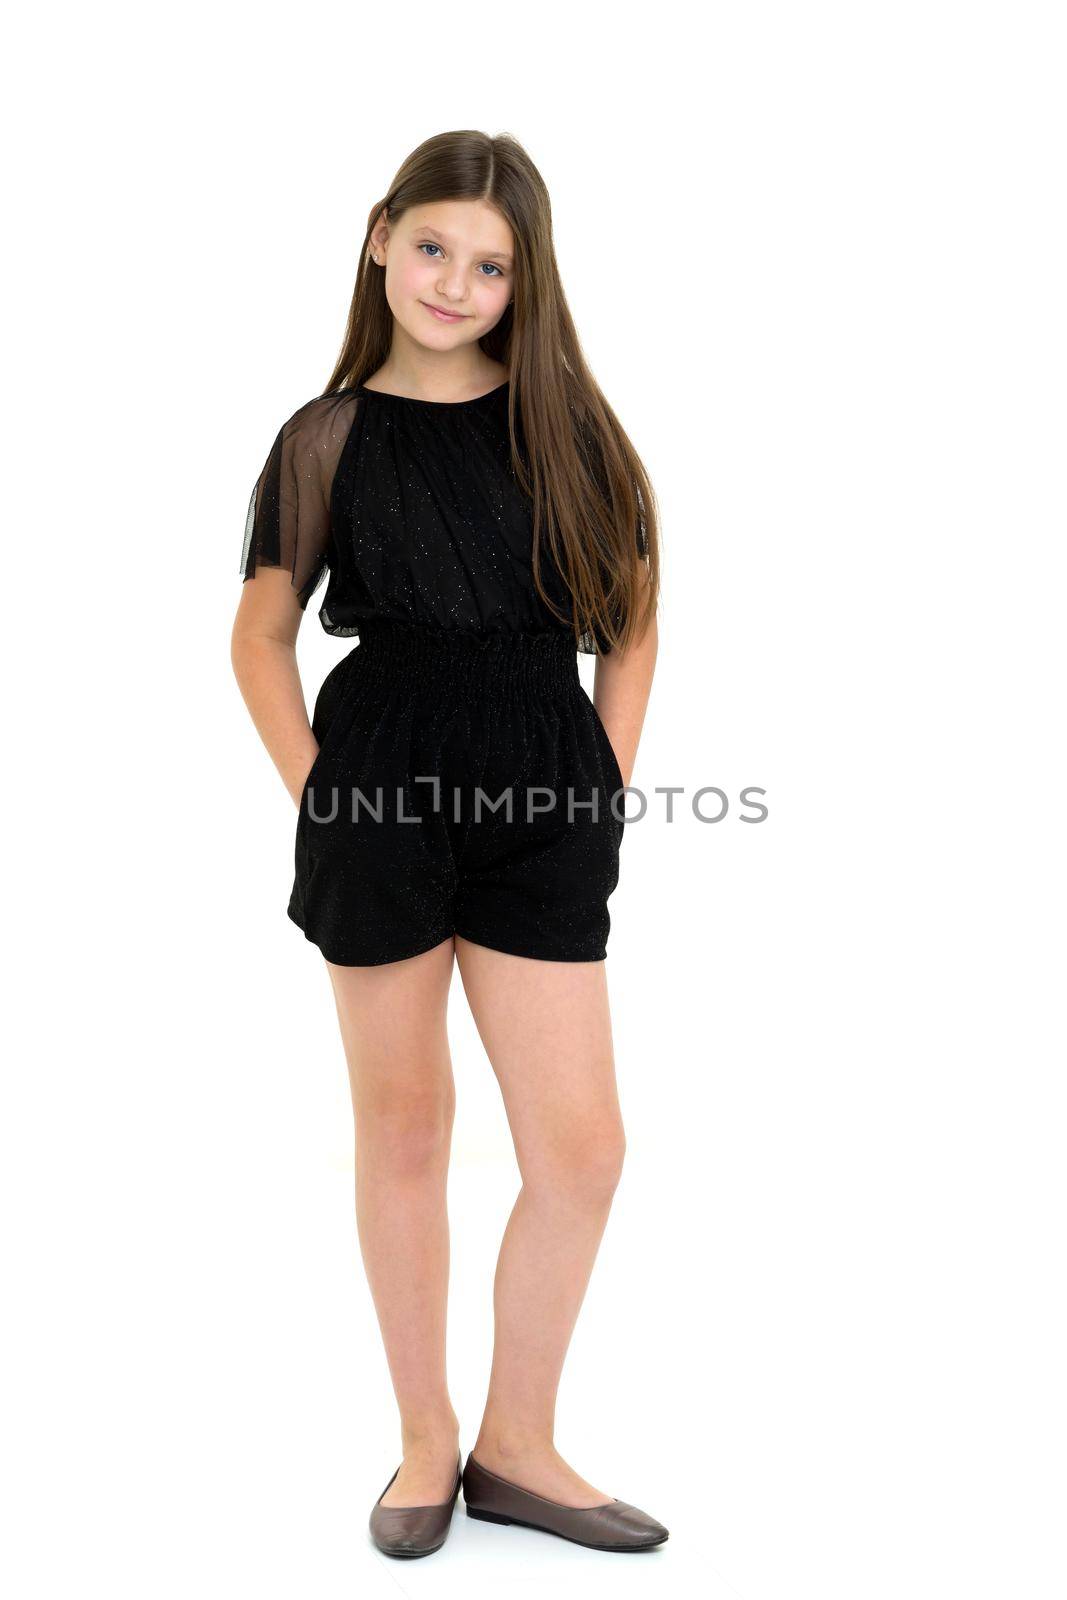 Pin-up girl in full growth smiling at the camera. Cheerful long-haired teenage girl, dressed in black overalls and shoes, stands on a white background in the studio and looks into the camera